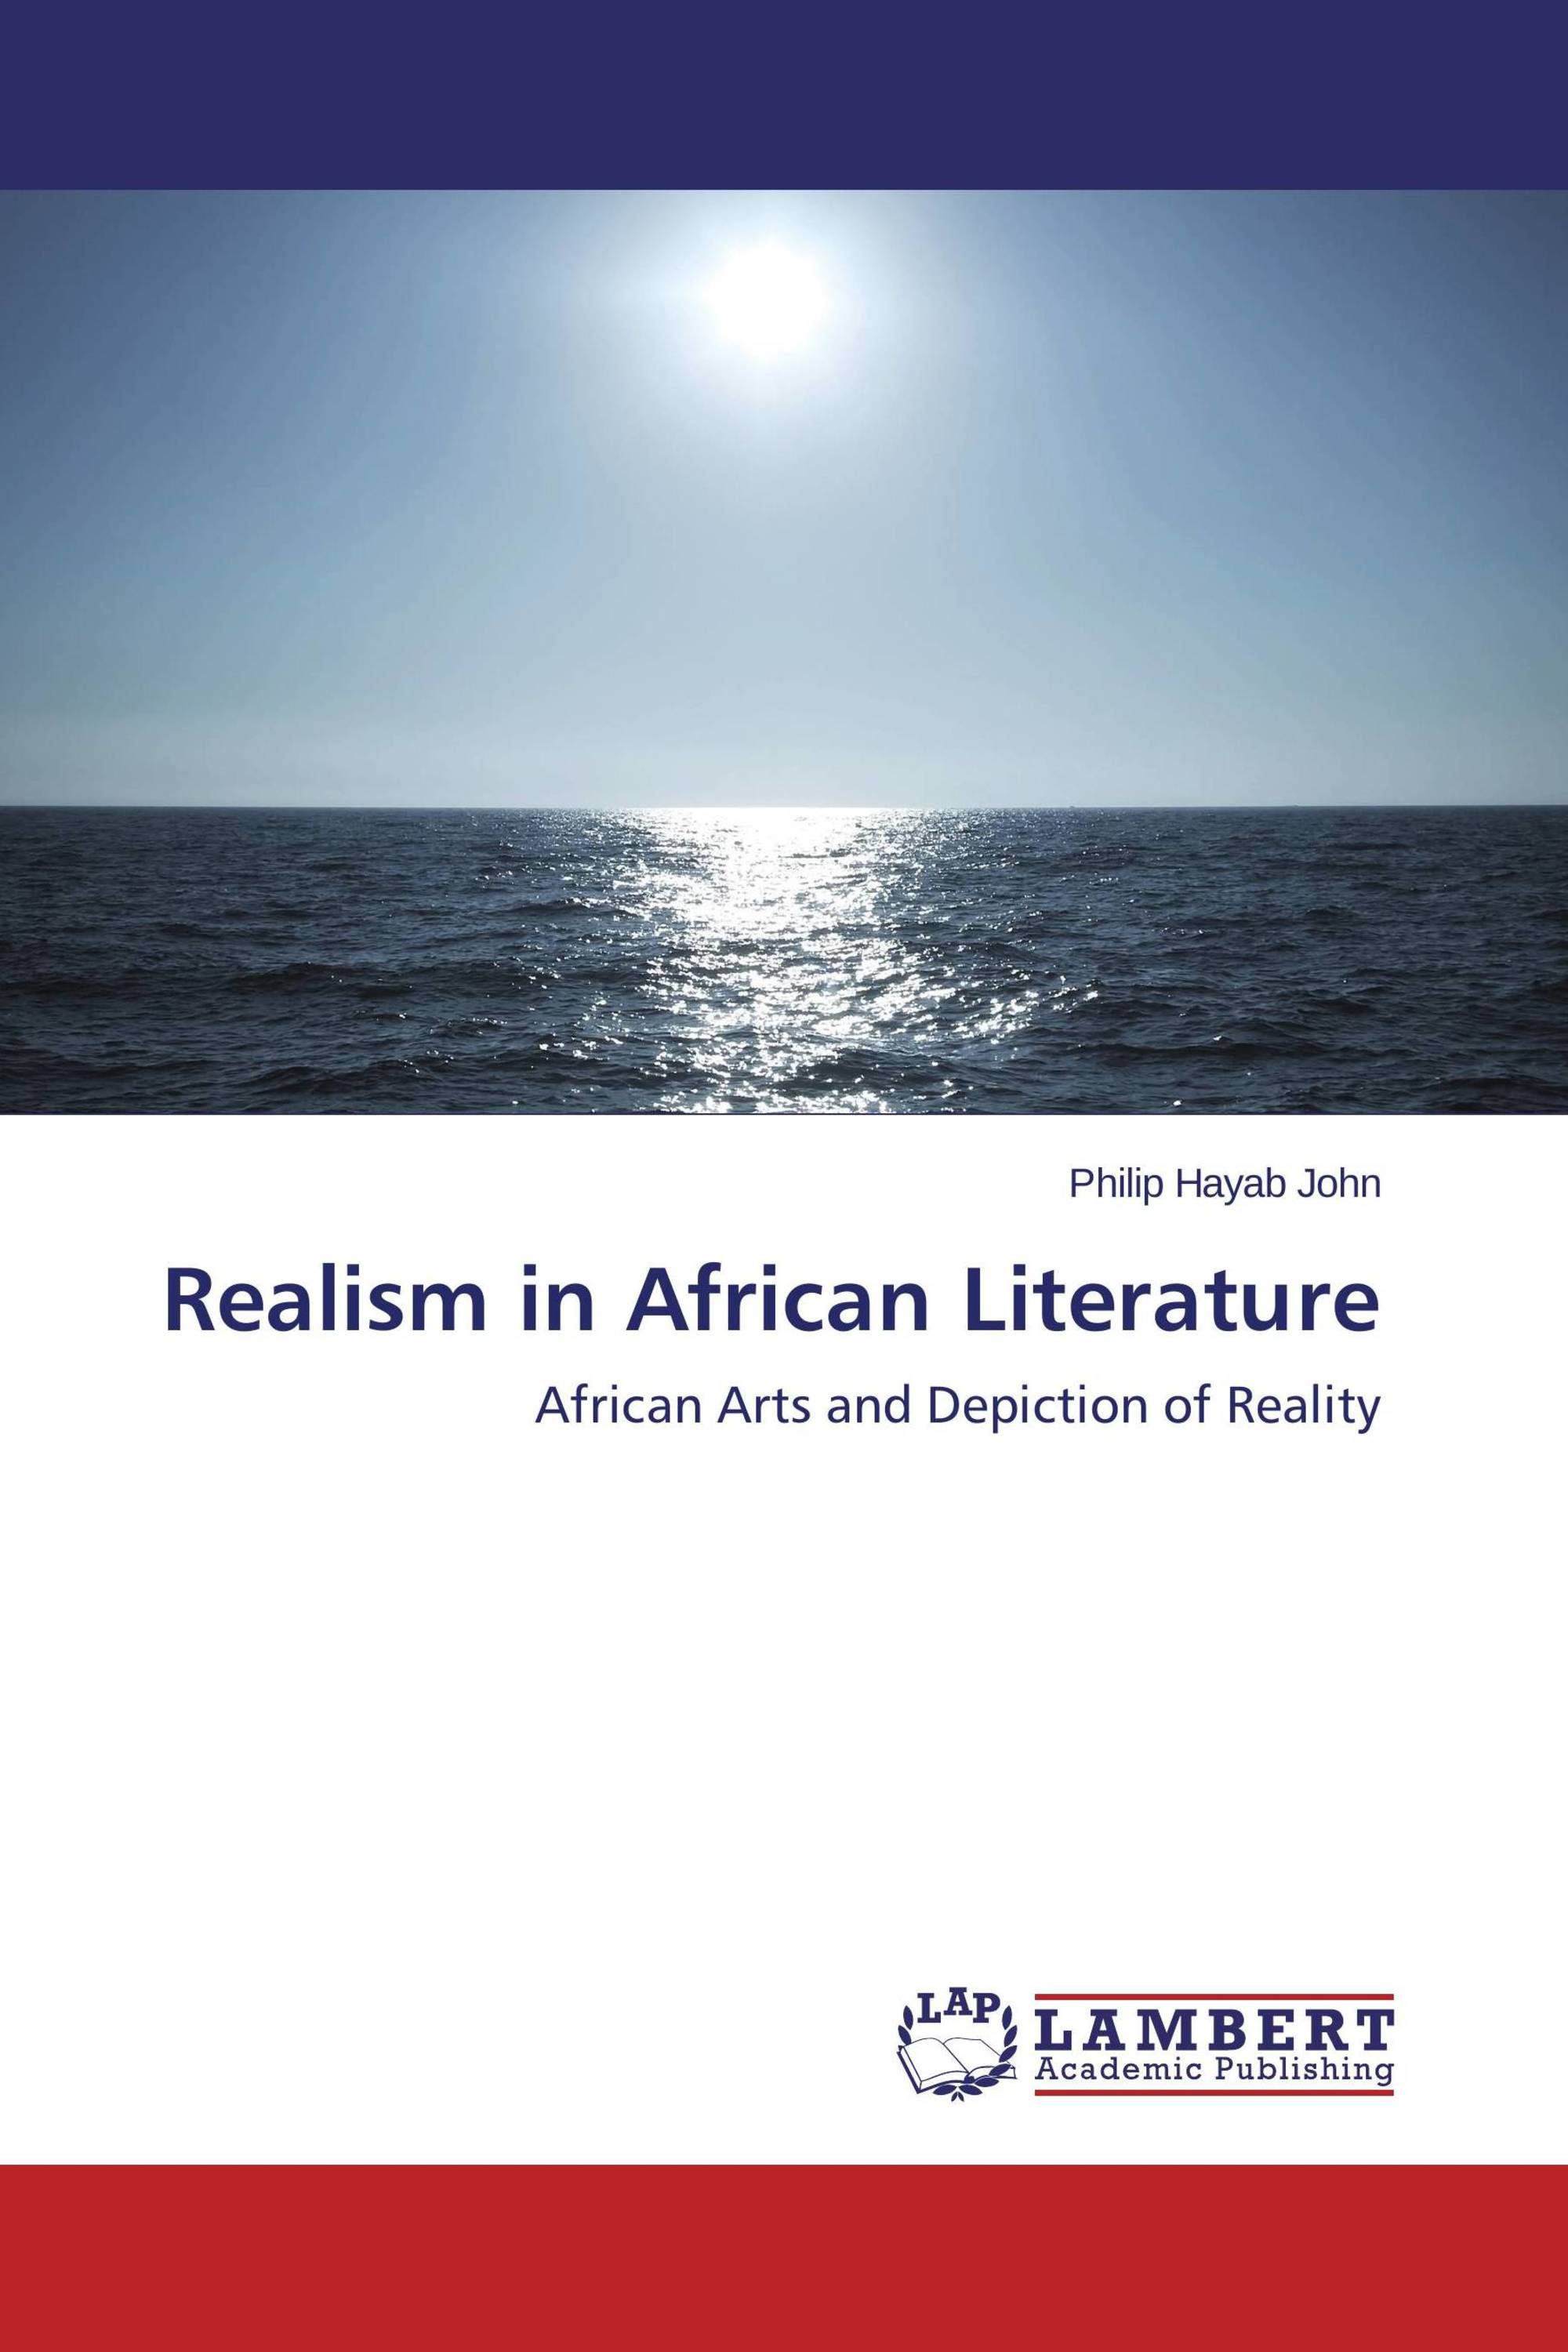 thesis on african american literature